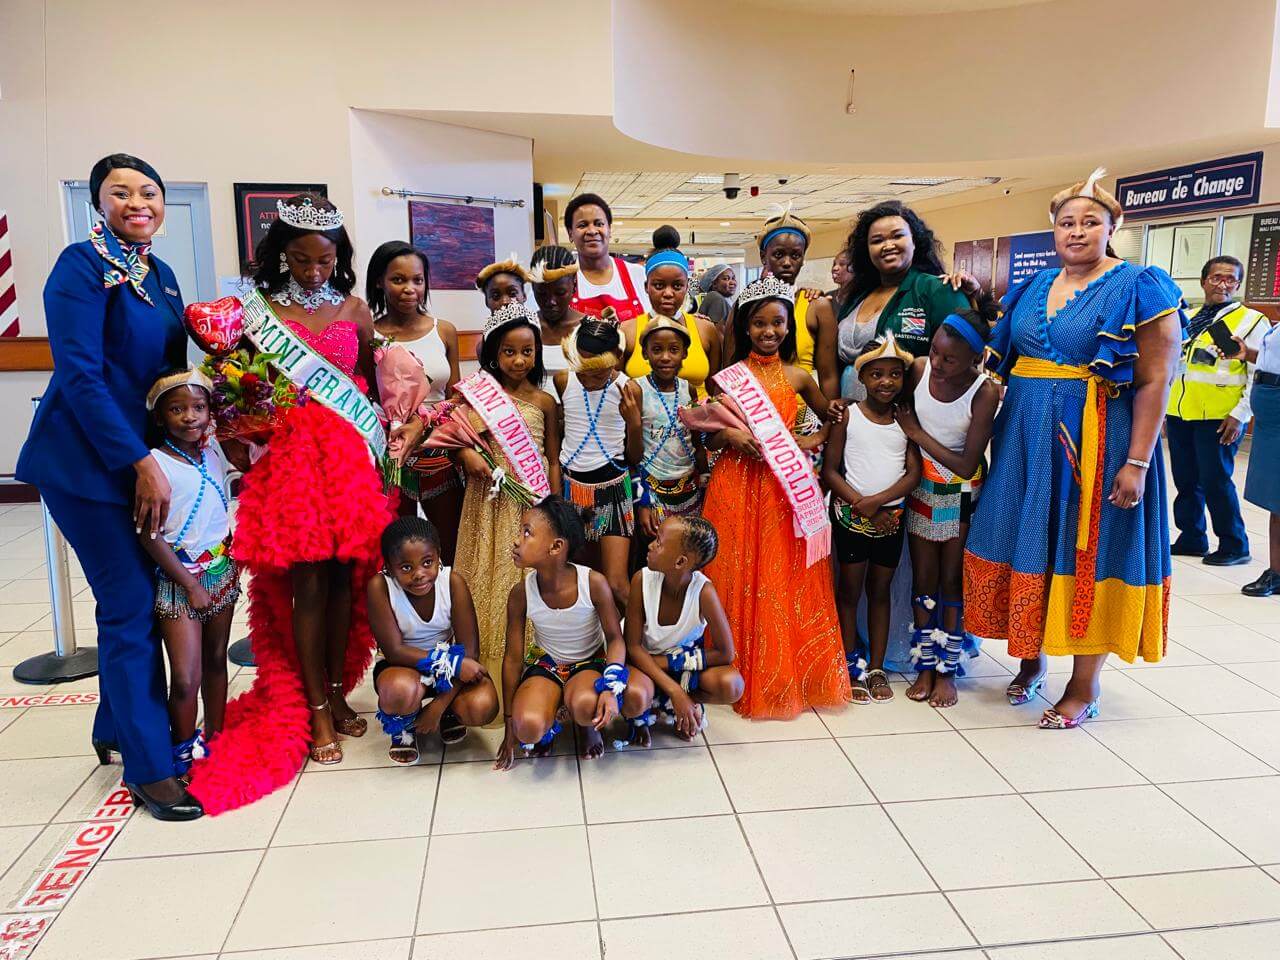 Kwa Bhaca Little Princess Receives Crown as Miss Mini Universe South Africa